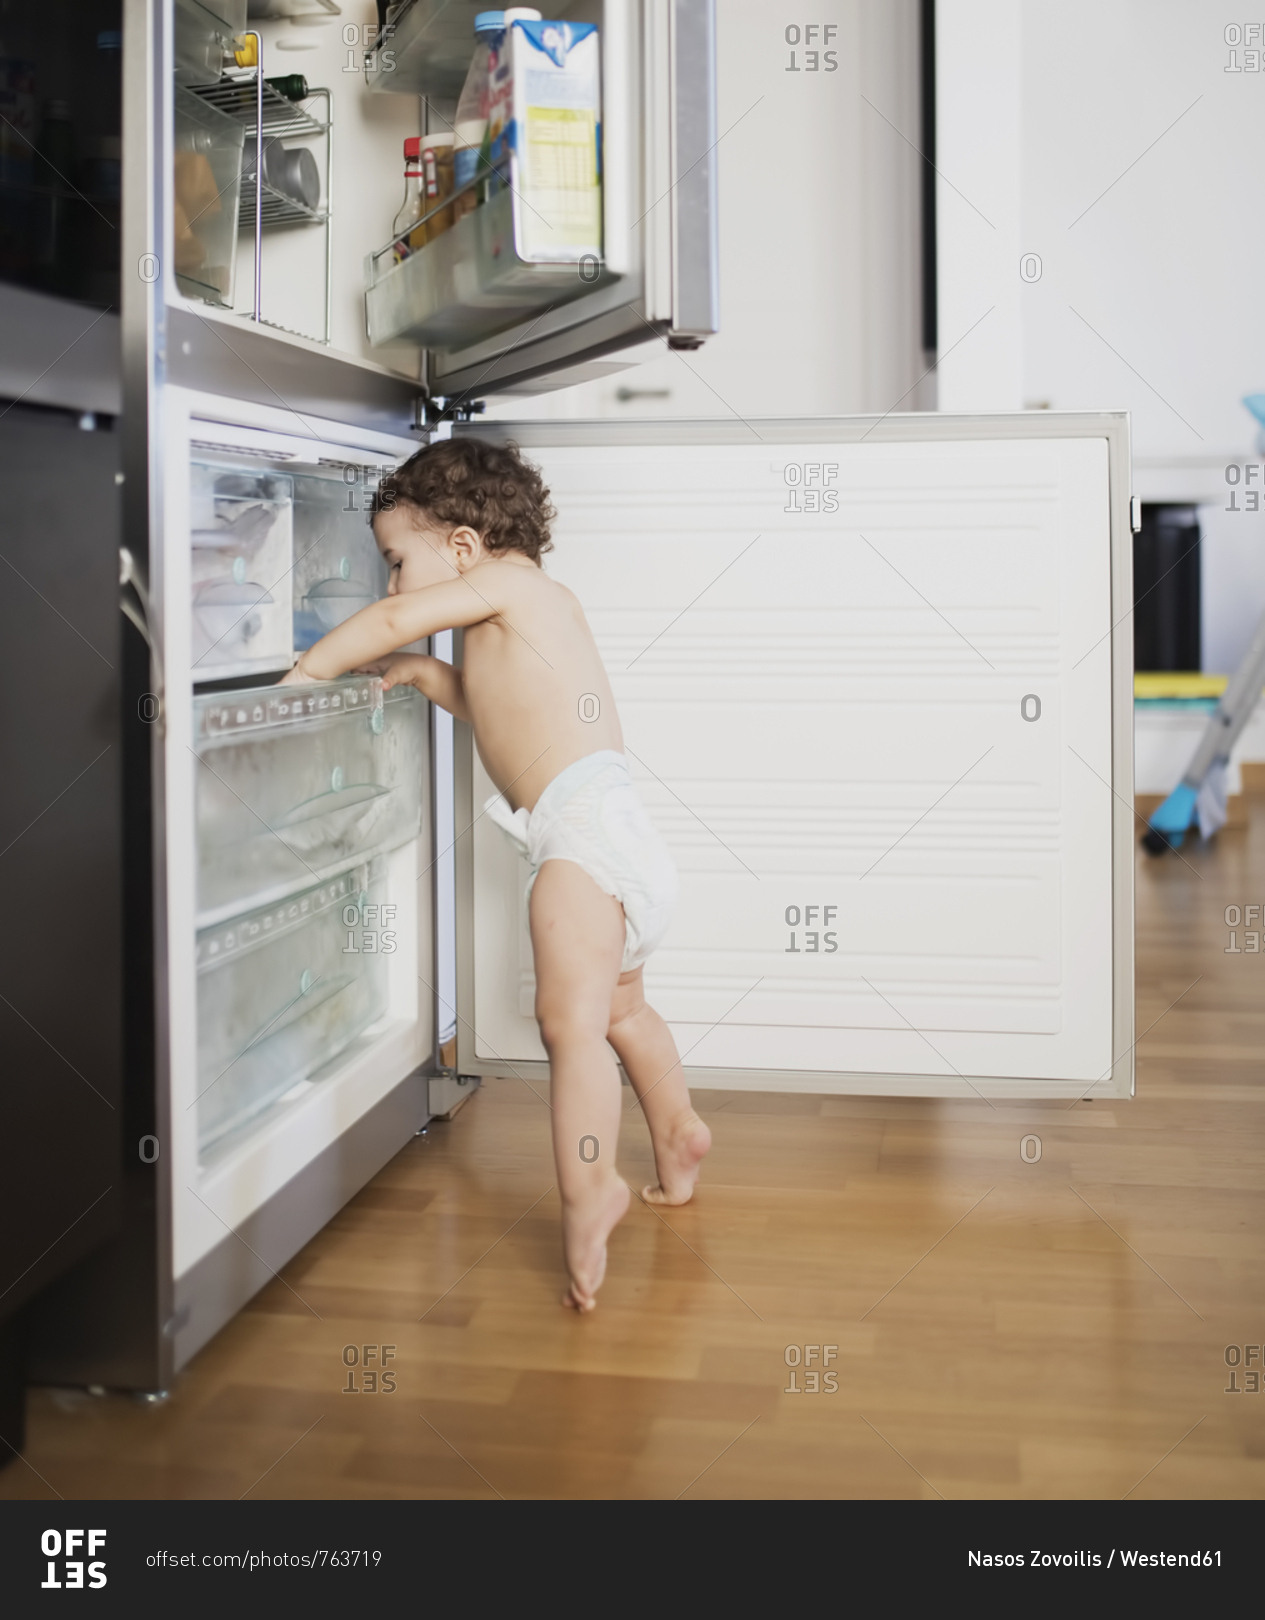 Baby boy wearing diaper exploring refrigerator in the kitchen